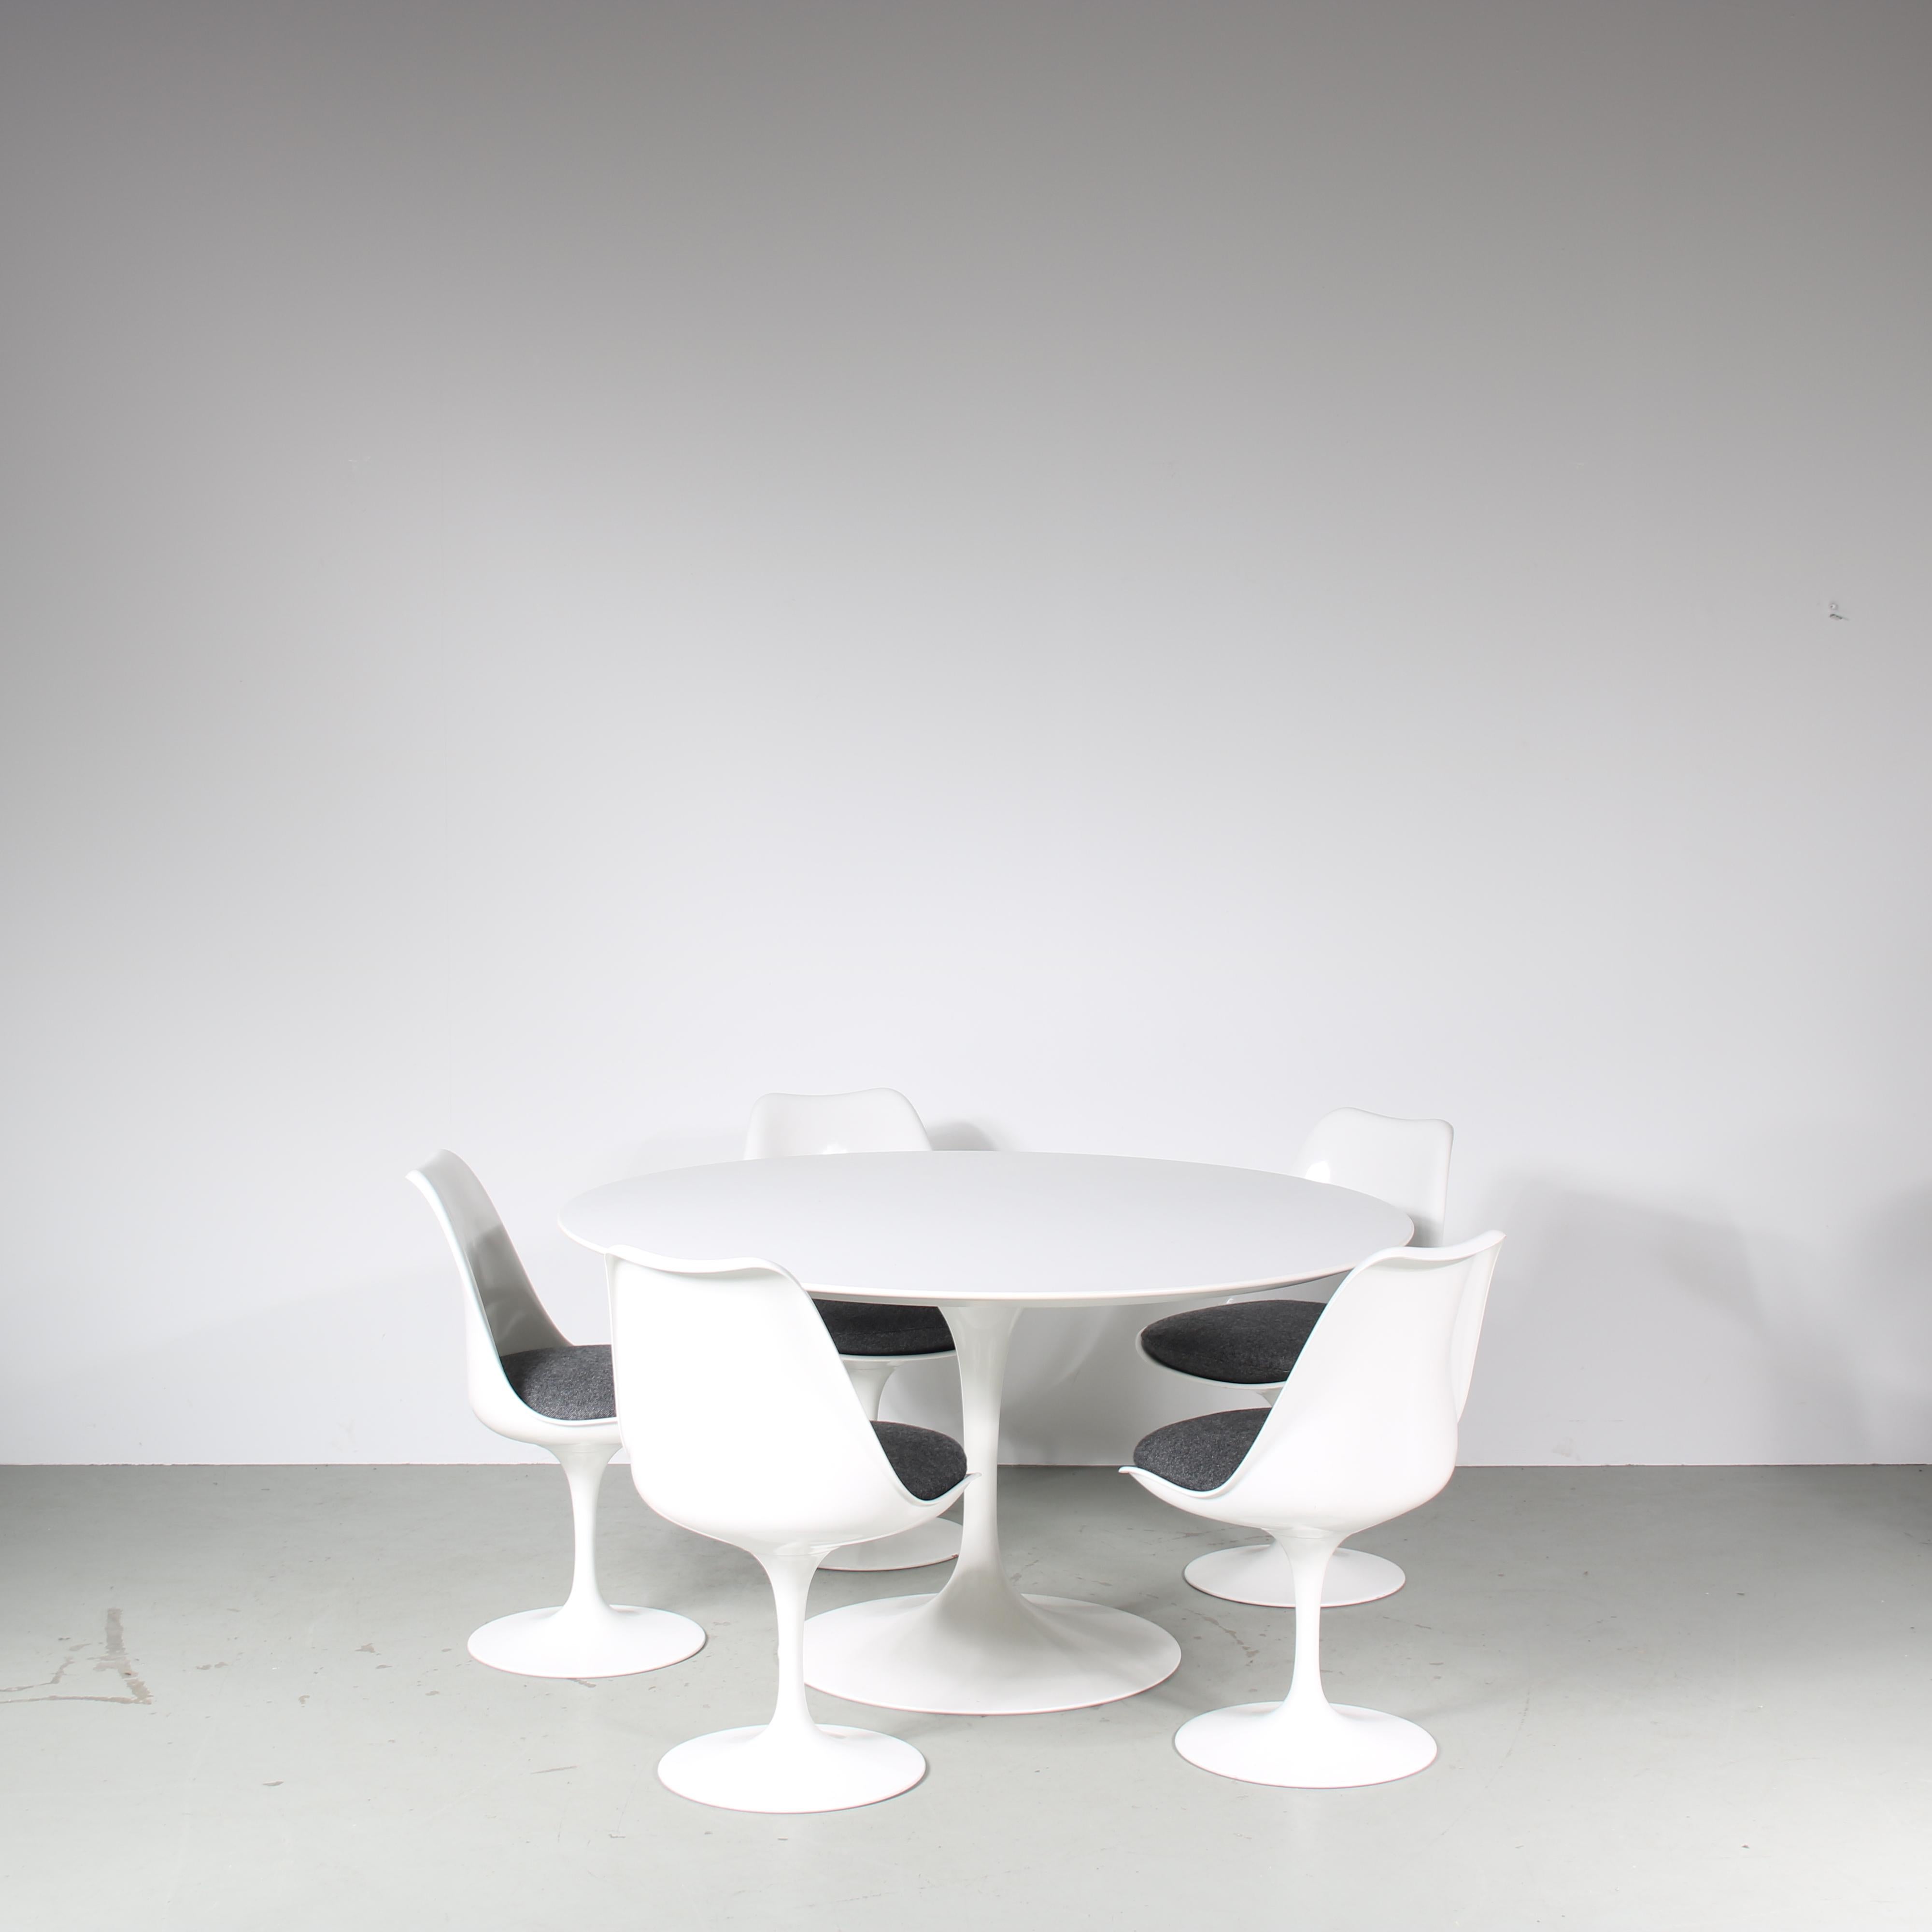 This set of five swivel dining chairs with matching dining table is a true icon of mid-century modern design, designed by Eero Saarinen and manufactured by Knoll International in the 1960s.

The chairs feature a modern and minimalist tulip base in